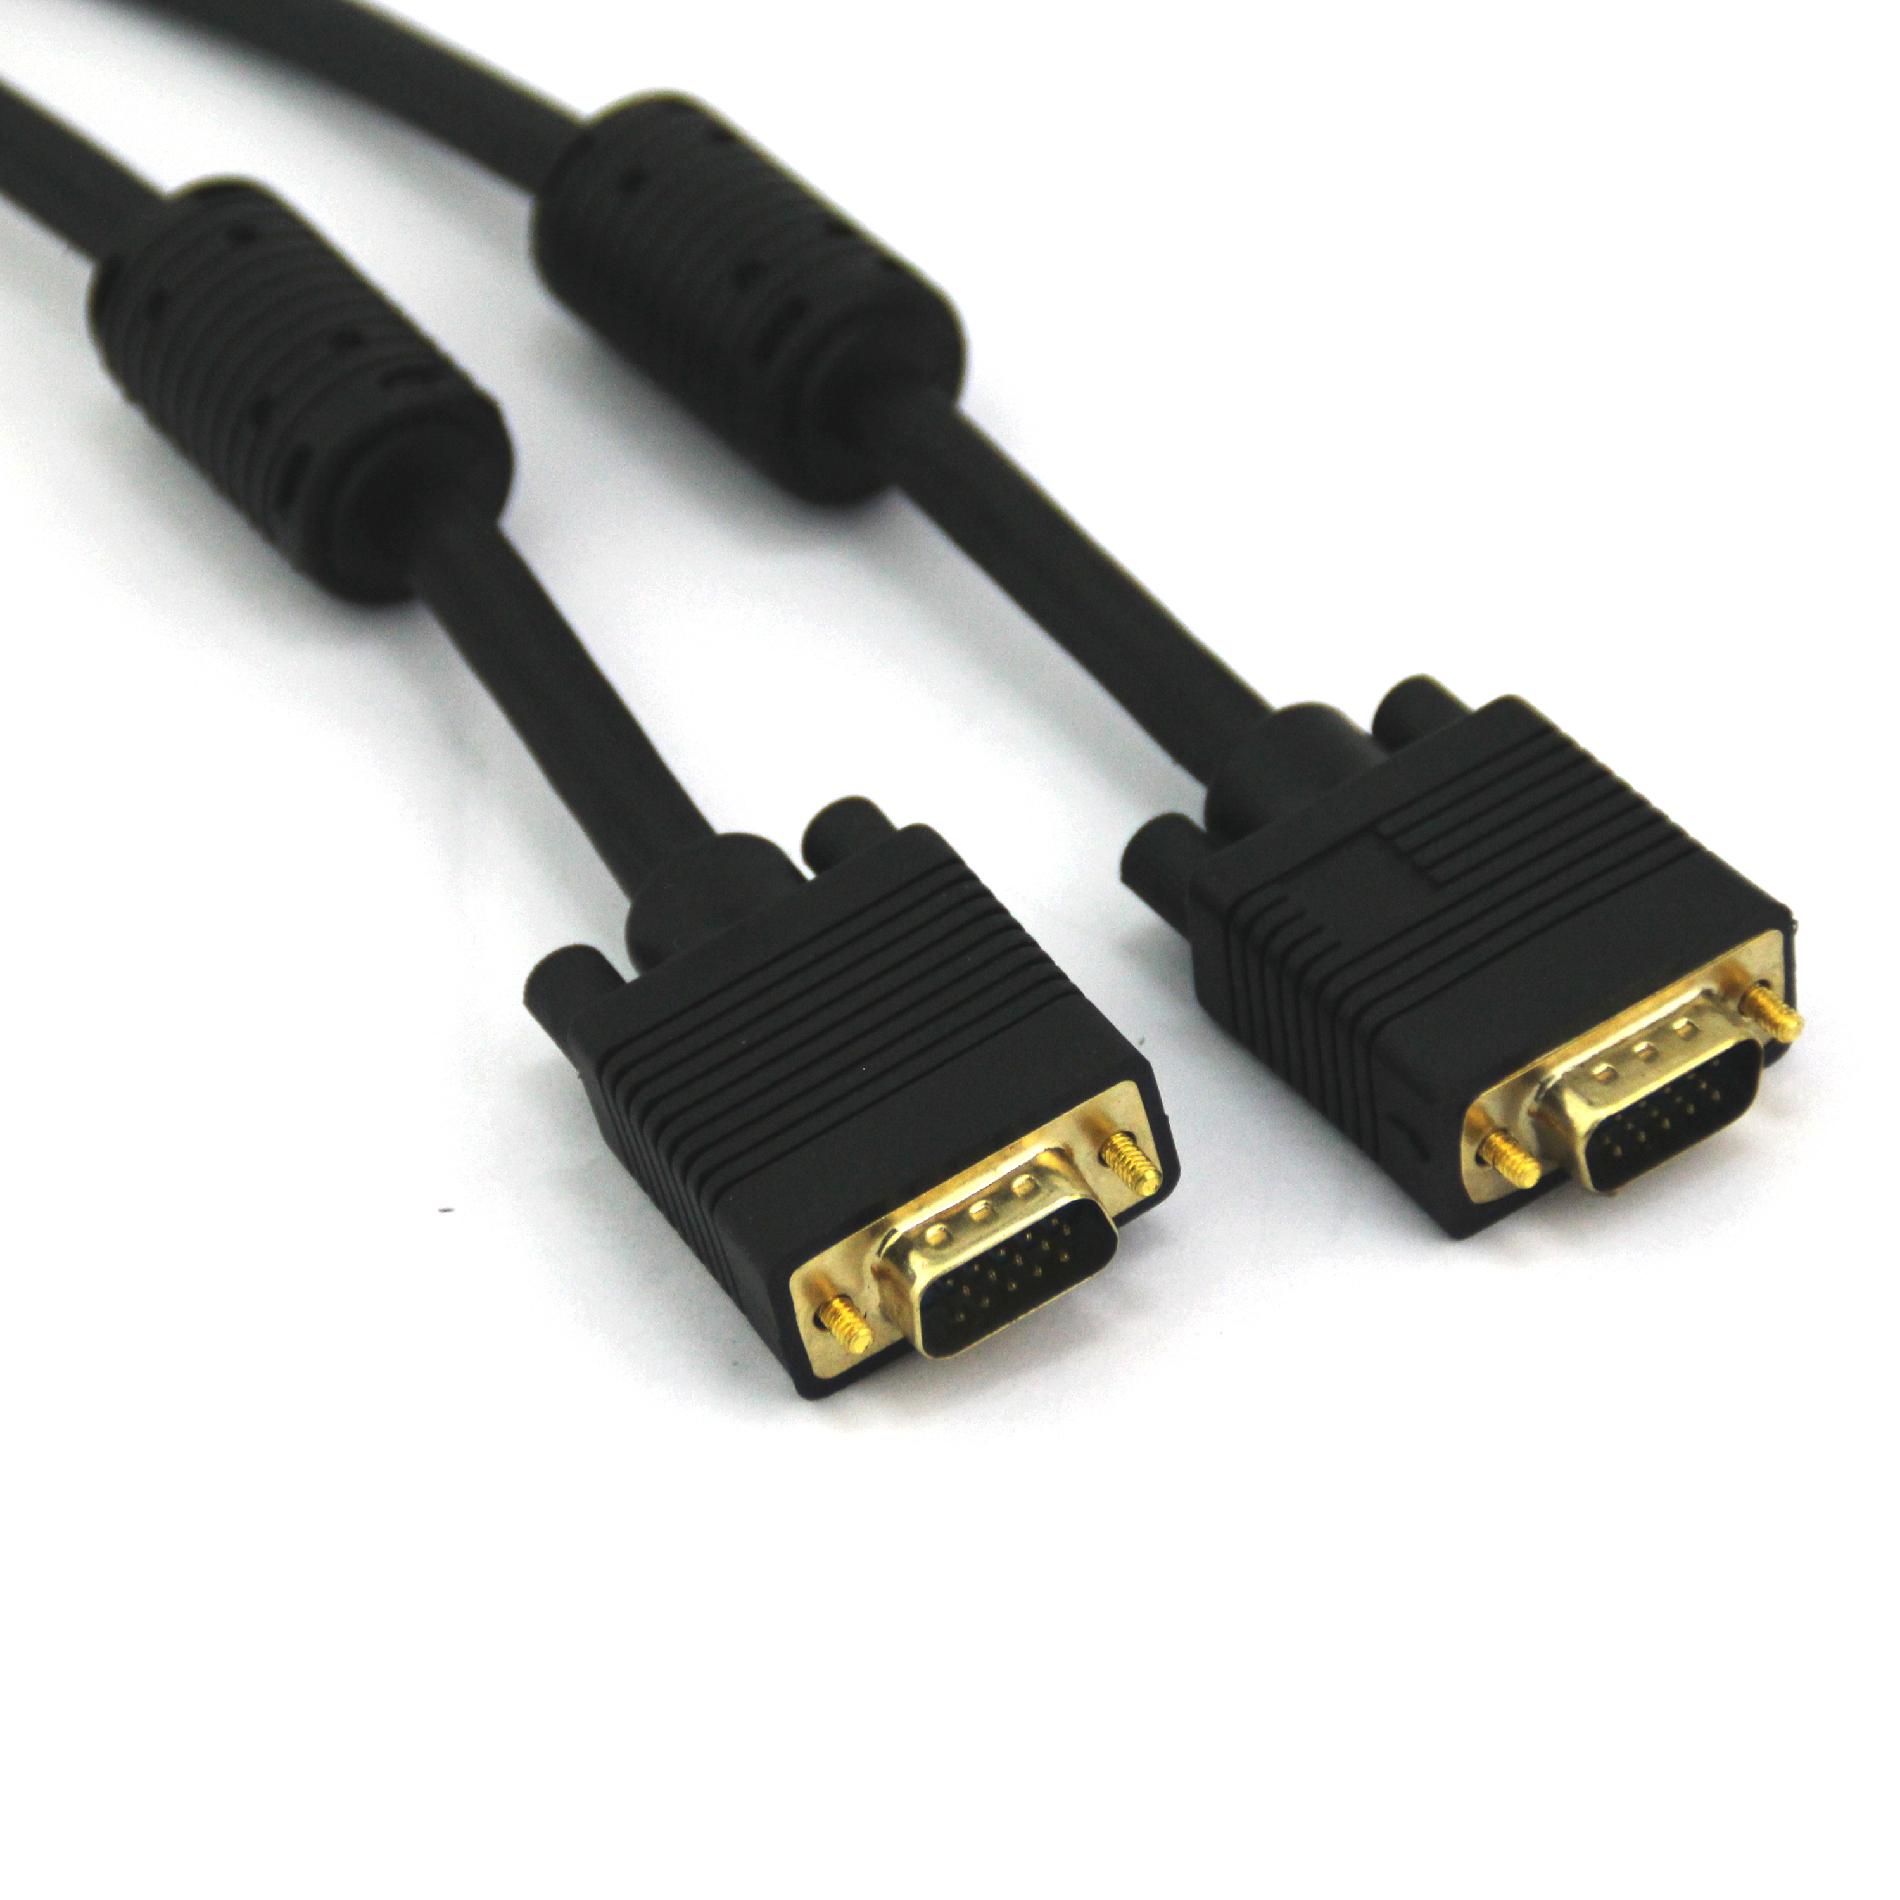 Vcom  VC-VGA25M SVGA HD15 Male to Male Black Cable  Gold Plated  25feet